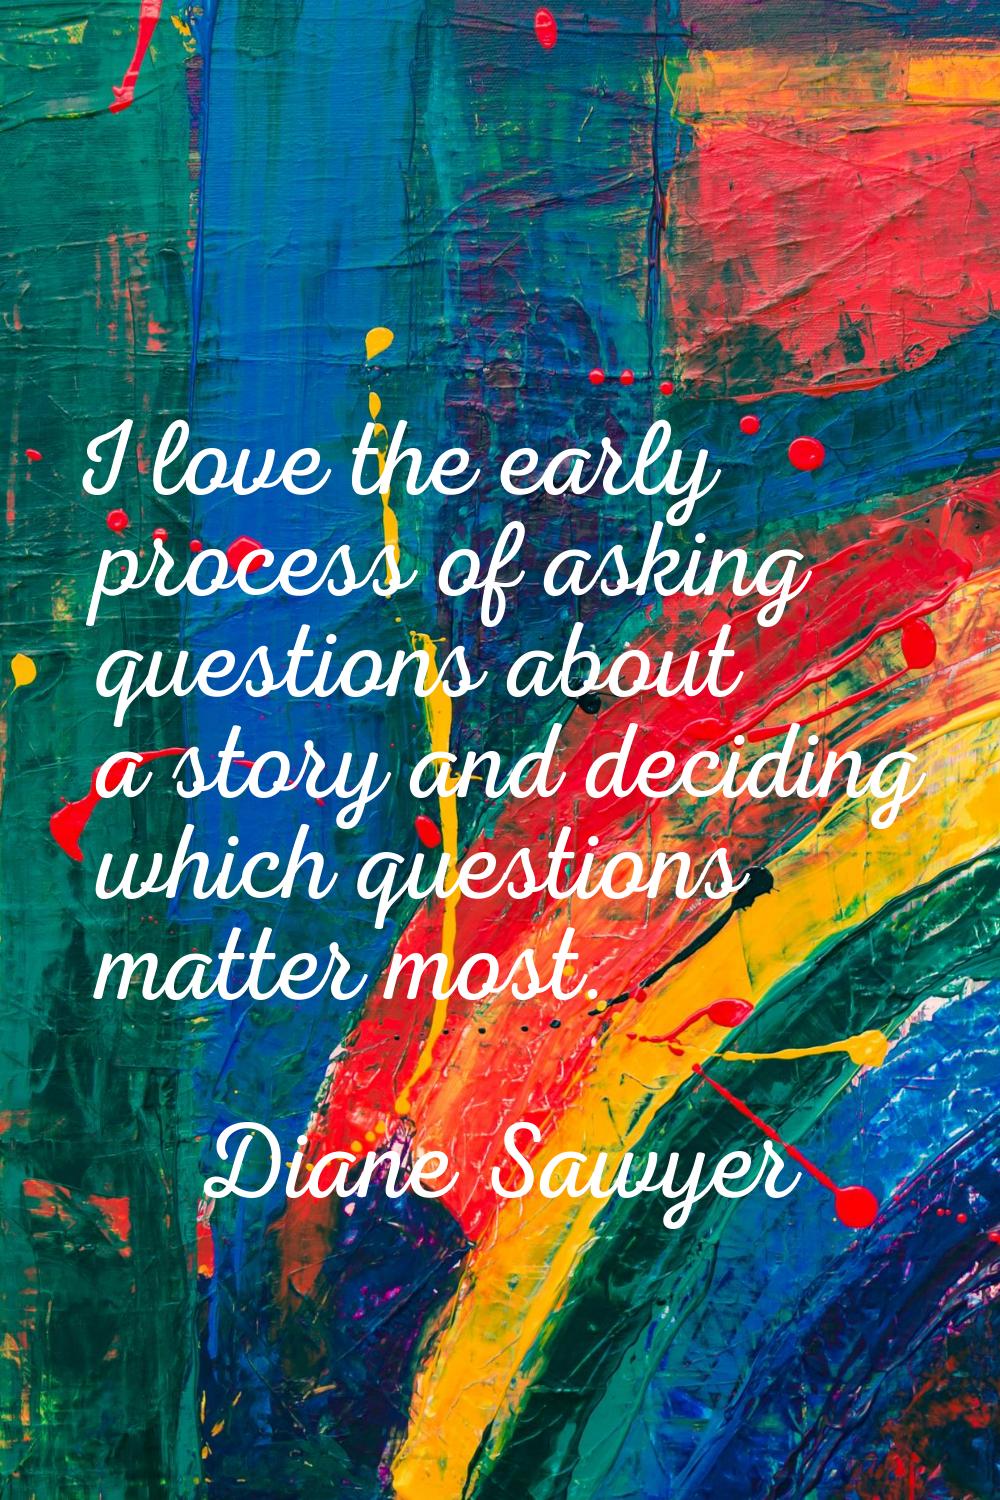 I love the early process of asking questions about a story and deciding which questions matter most